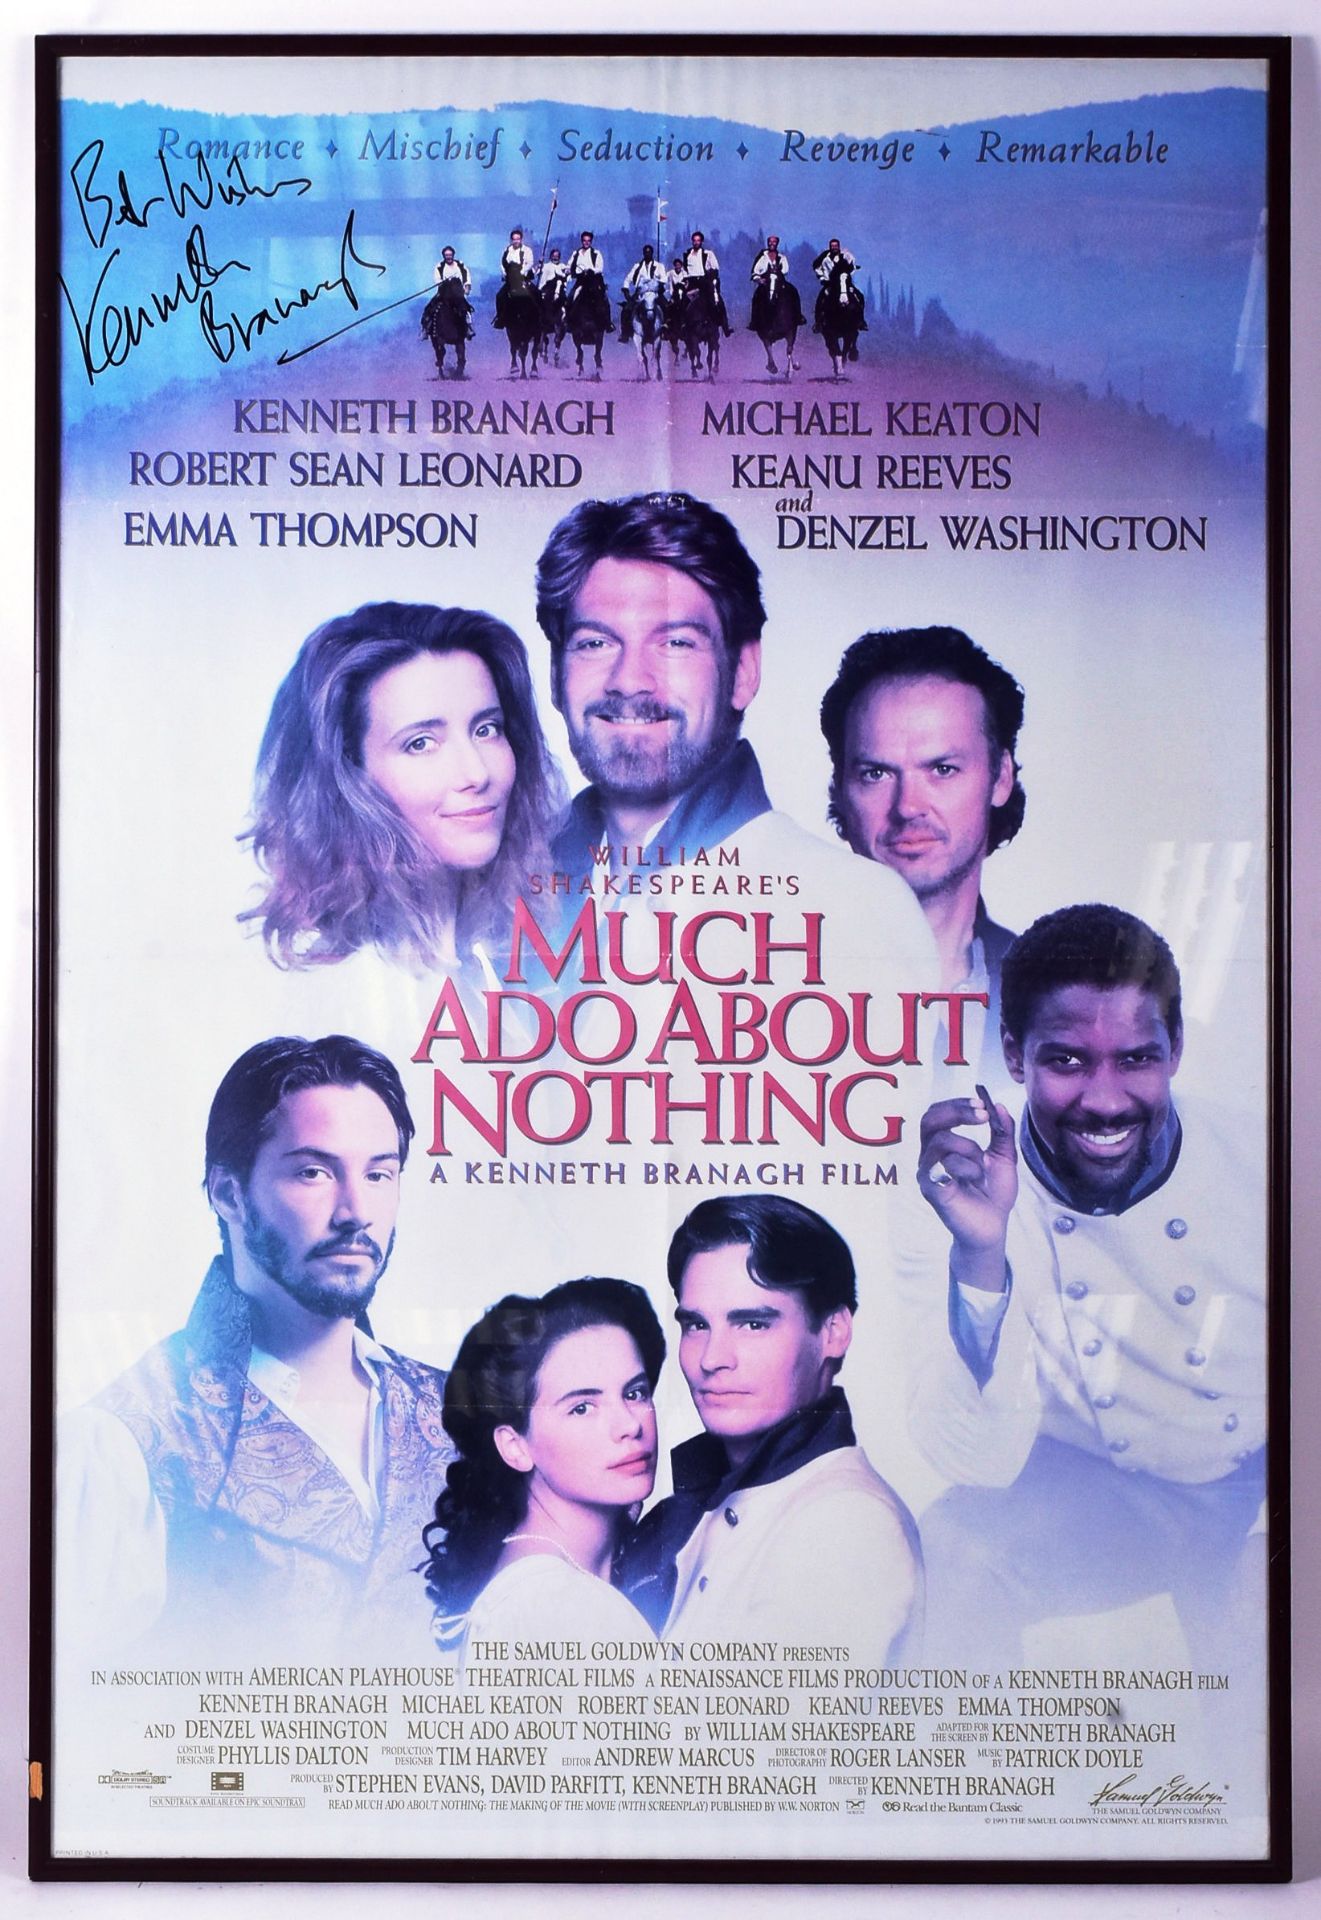 MUCH ADO ABOUT NOTHING (1993) - SIR KENNETH BRANAGH SIGNED POSTER